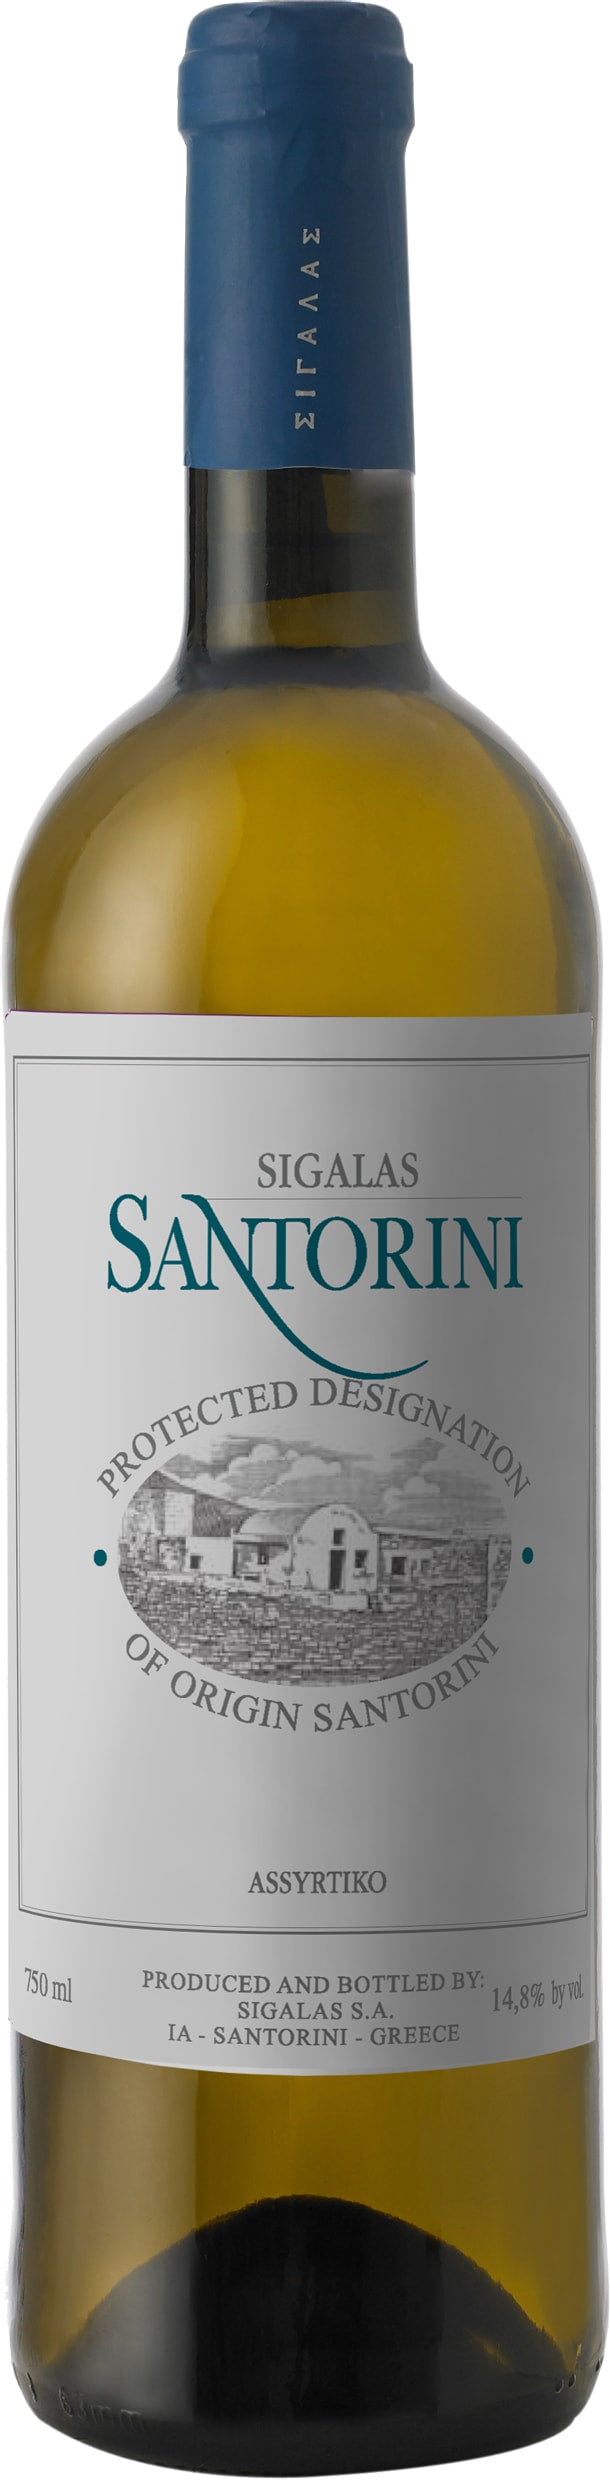 Sigalas Santorini Assyrtiko 2022 75cl - Buy Sigalas Wines from GREAT WINES DIRECT wine shop